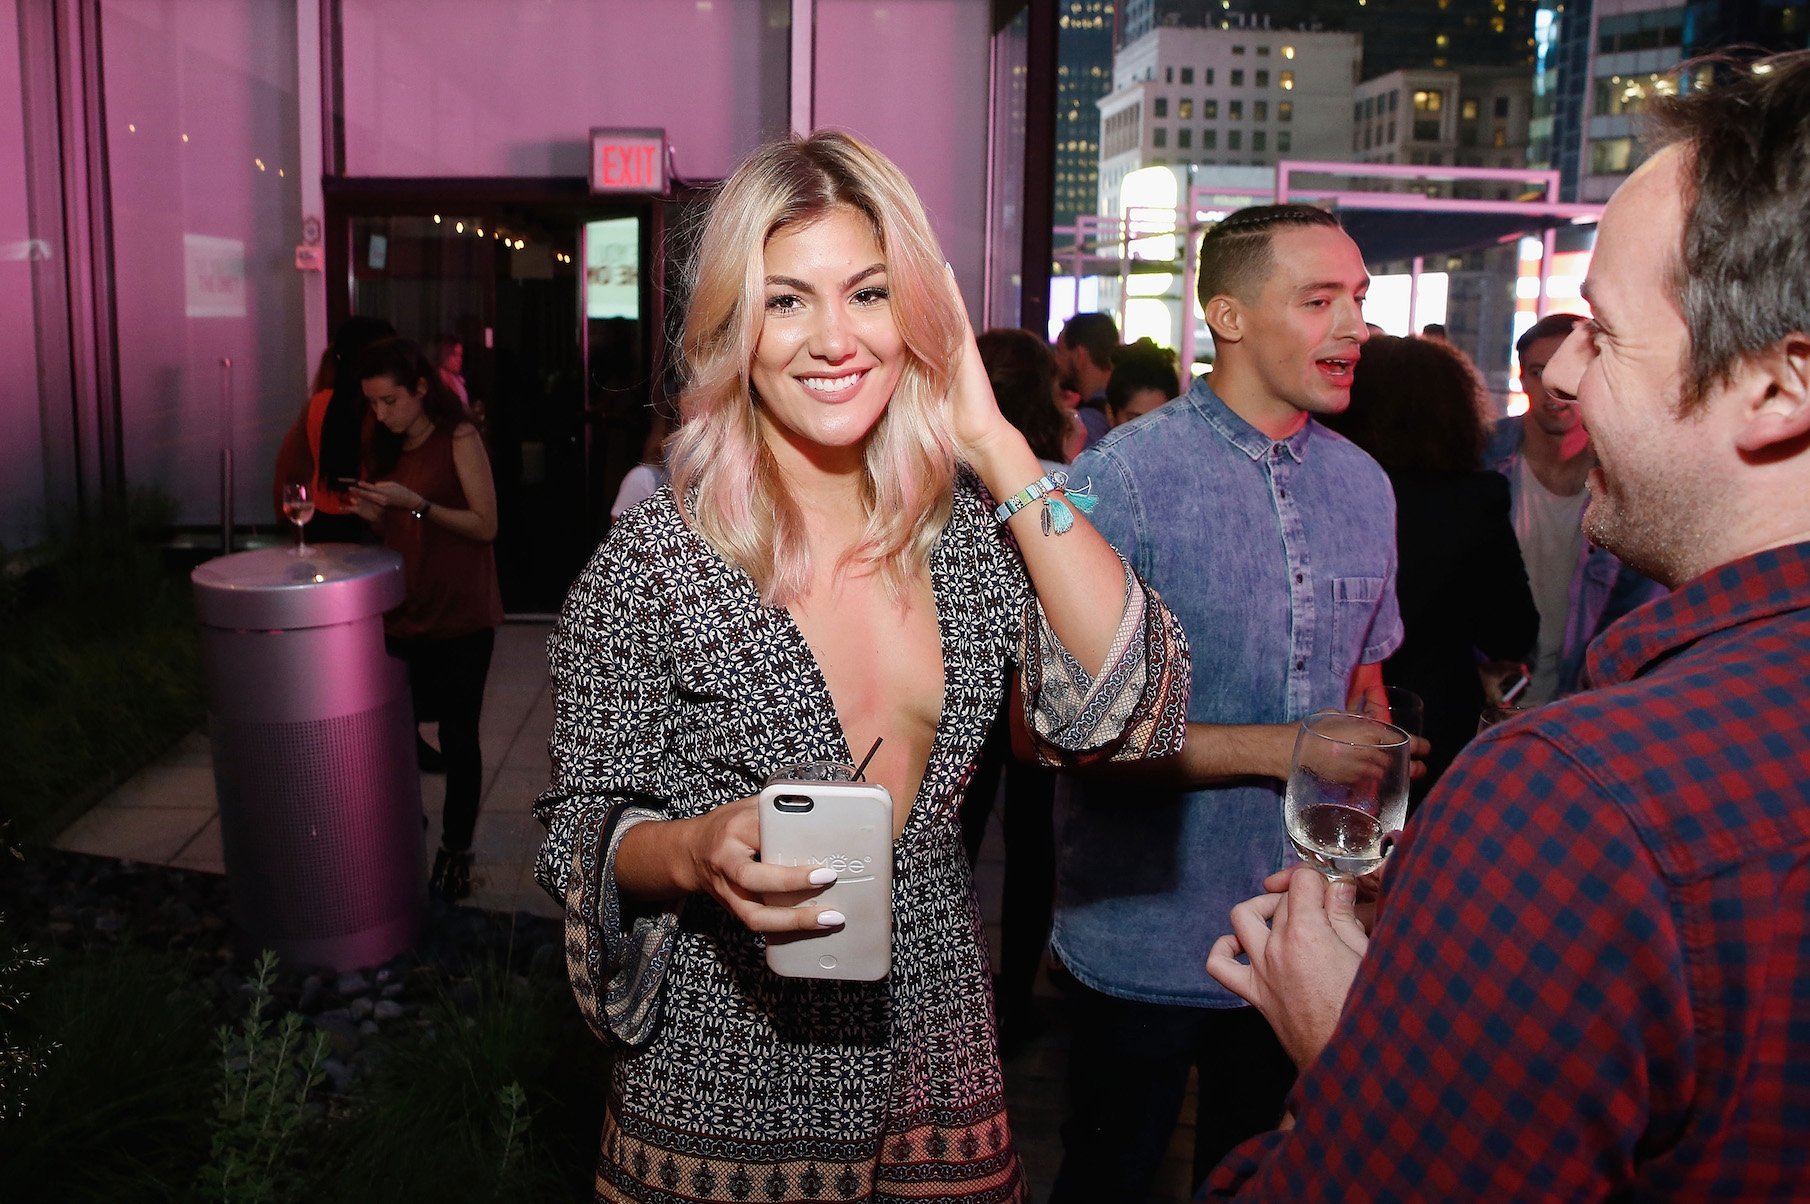 Tori Deal from MTV's 'The Challenge' Season 37 at an 'Are You the One?' event smiling and holding a drink